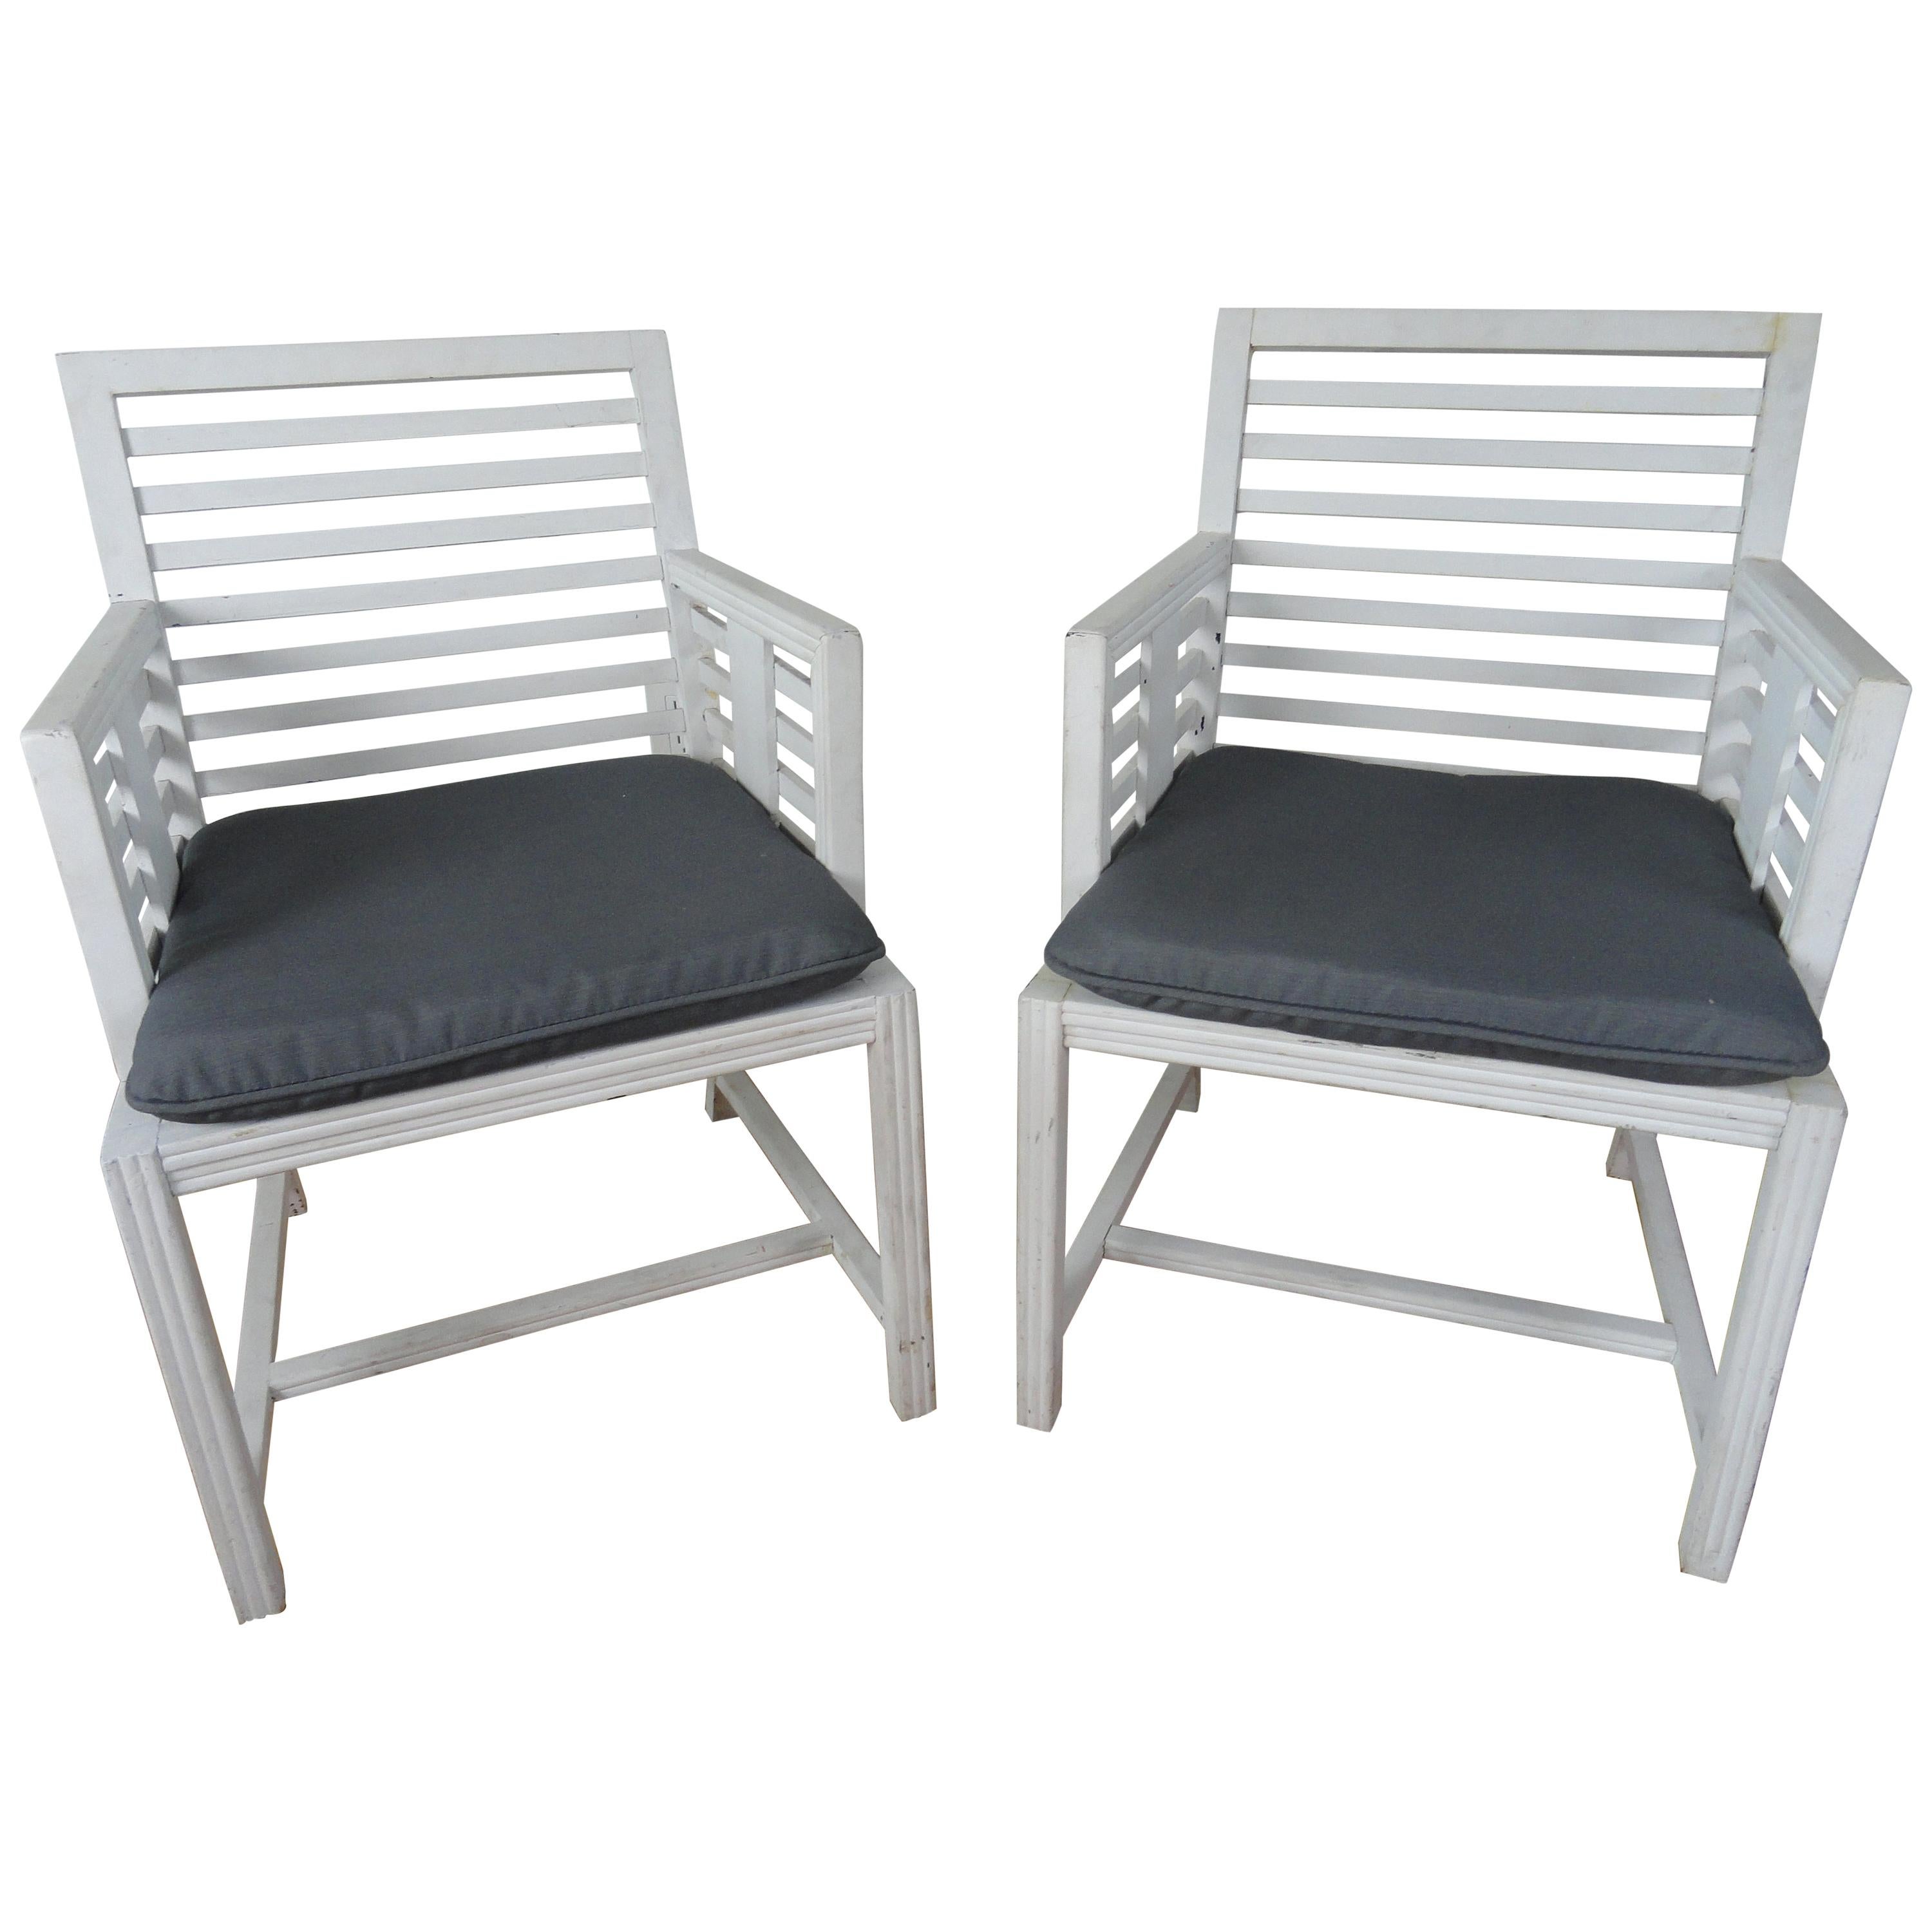 Pair of 1940s Wood Slat Chairs For Sale